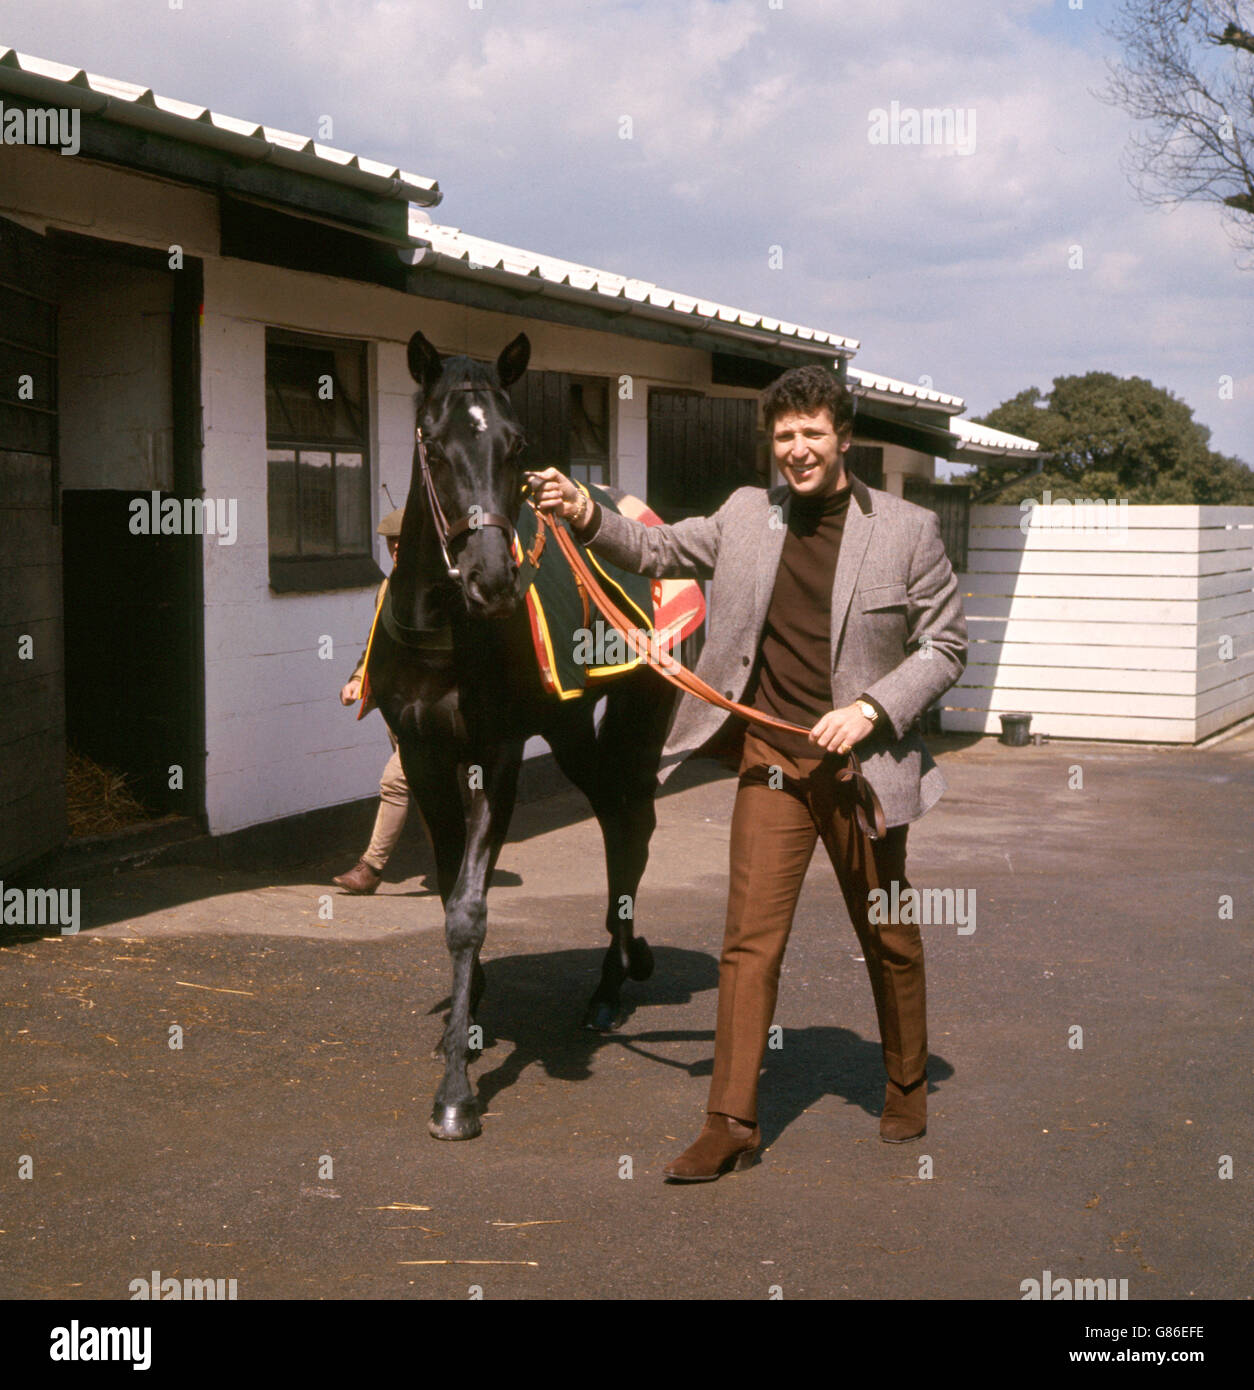 Welsh singer Tom Jones with the racehorse 'Walk On By!' which he has just purchased for an undisclosed sum at Brian Swift's stables at Epsom in Surrey. The racehorse is named after a Burt Bacharach pop song, originally sung by Dionne Warwick. Stock Photo